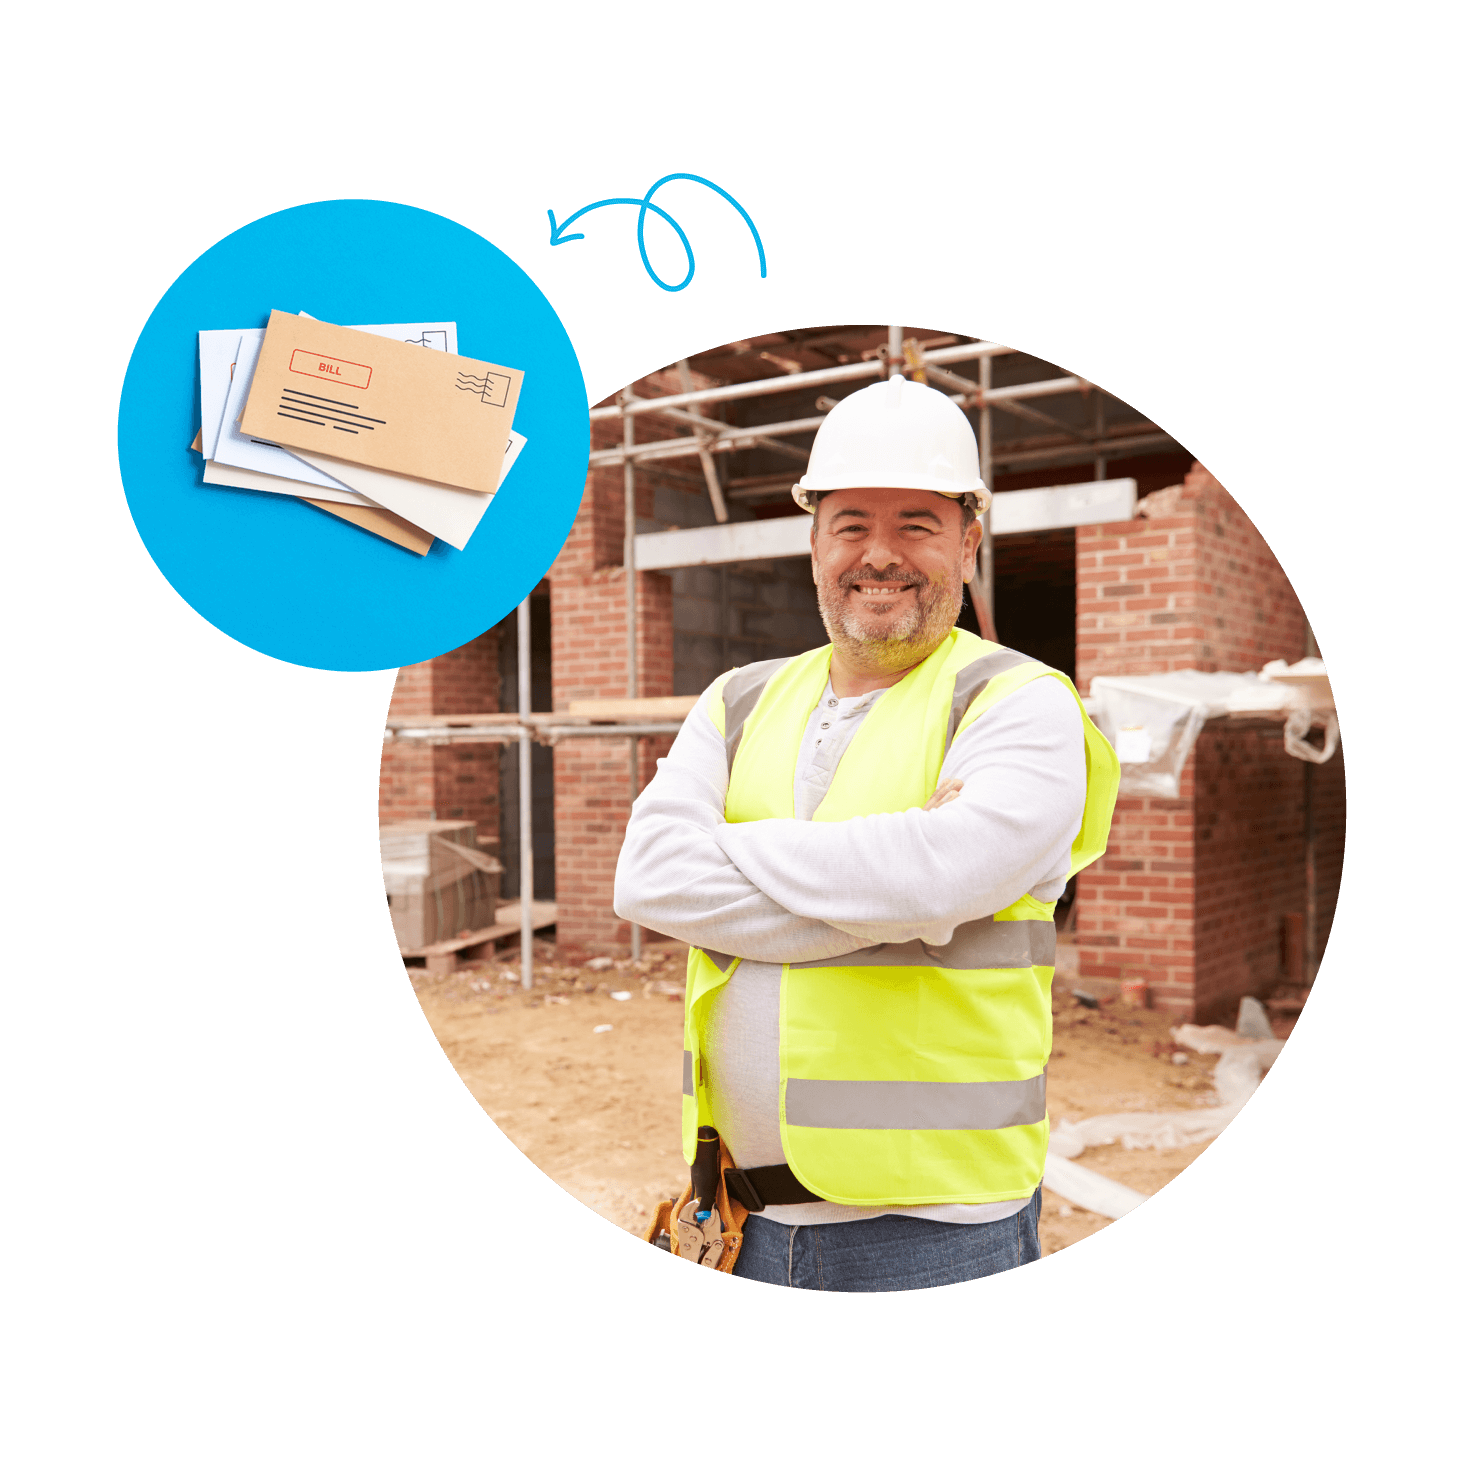 A building foreman at a construction site is relaxed about their CIS scheme deductions, knowing Xero makes it easy.